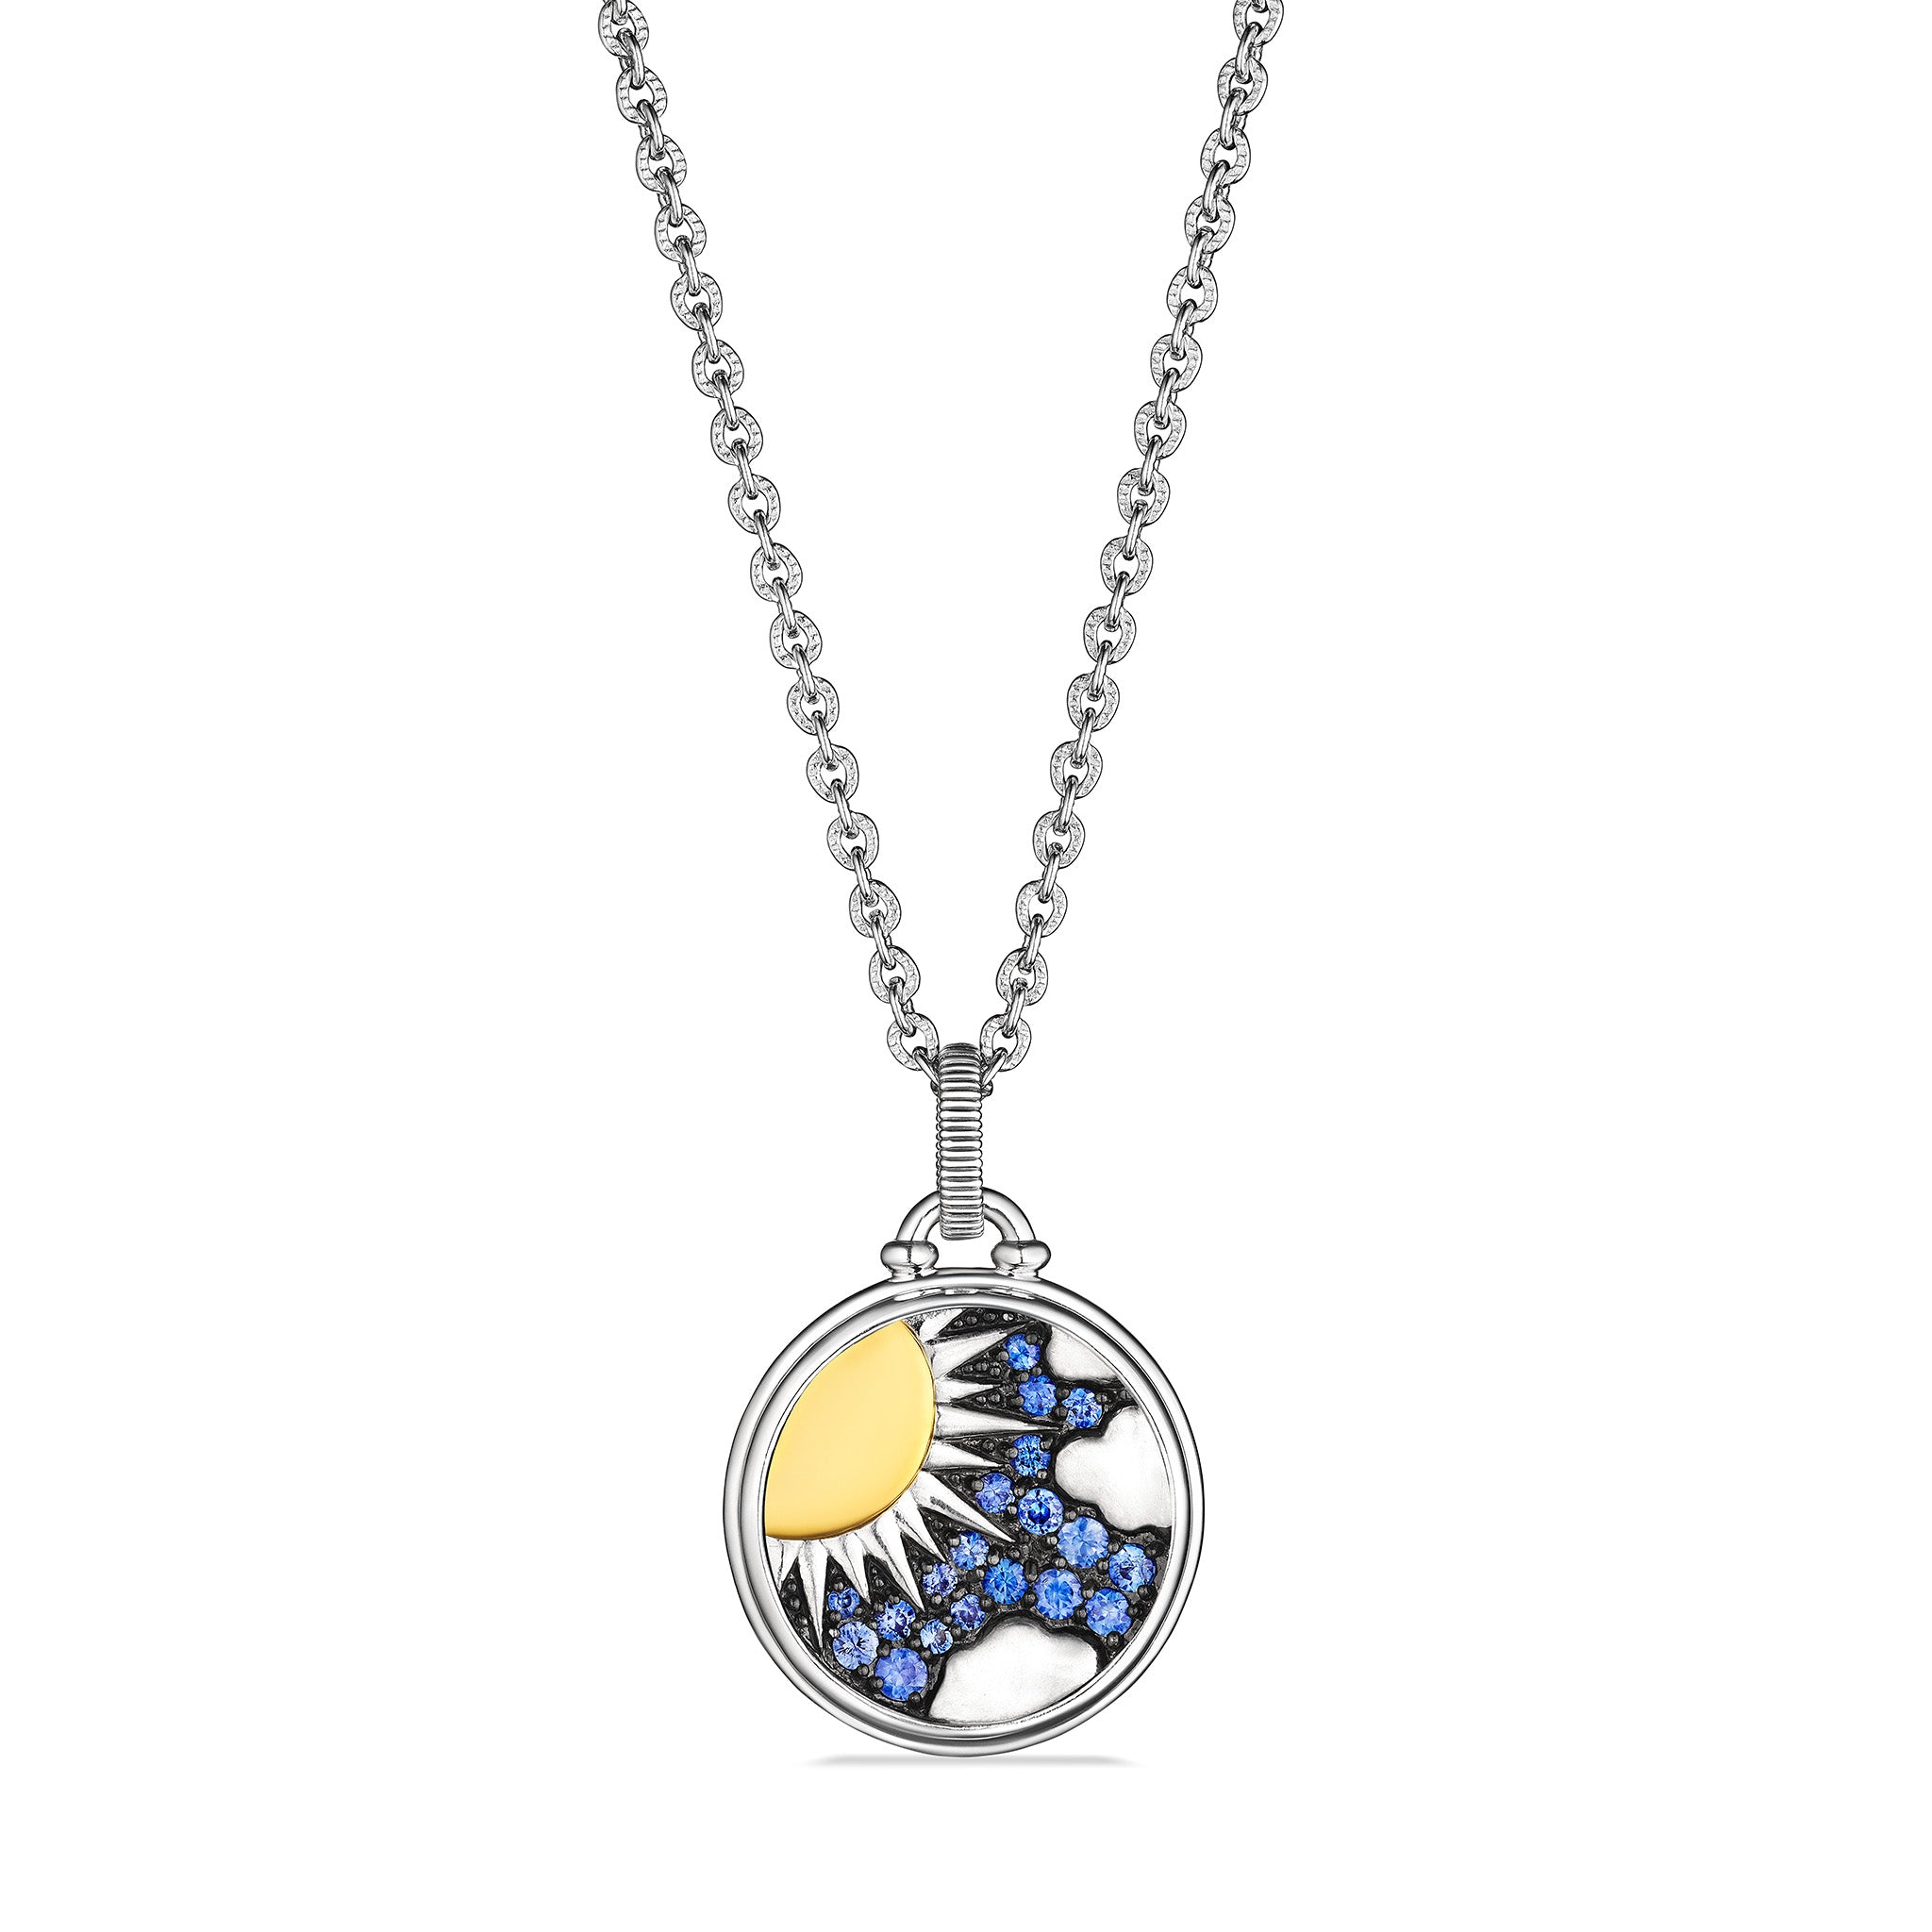 Little Luxuries Sunshine Medallion Necklace With Blue Sapphire, Diamonds And 18K Gold